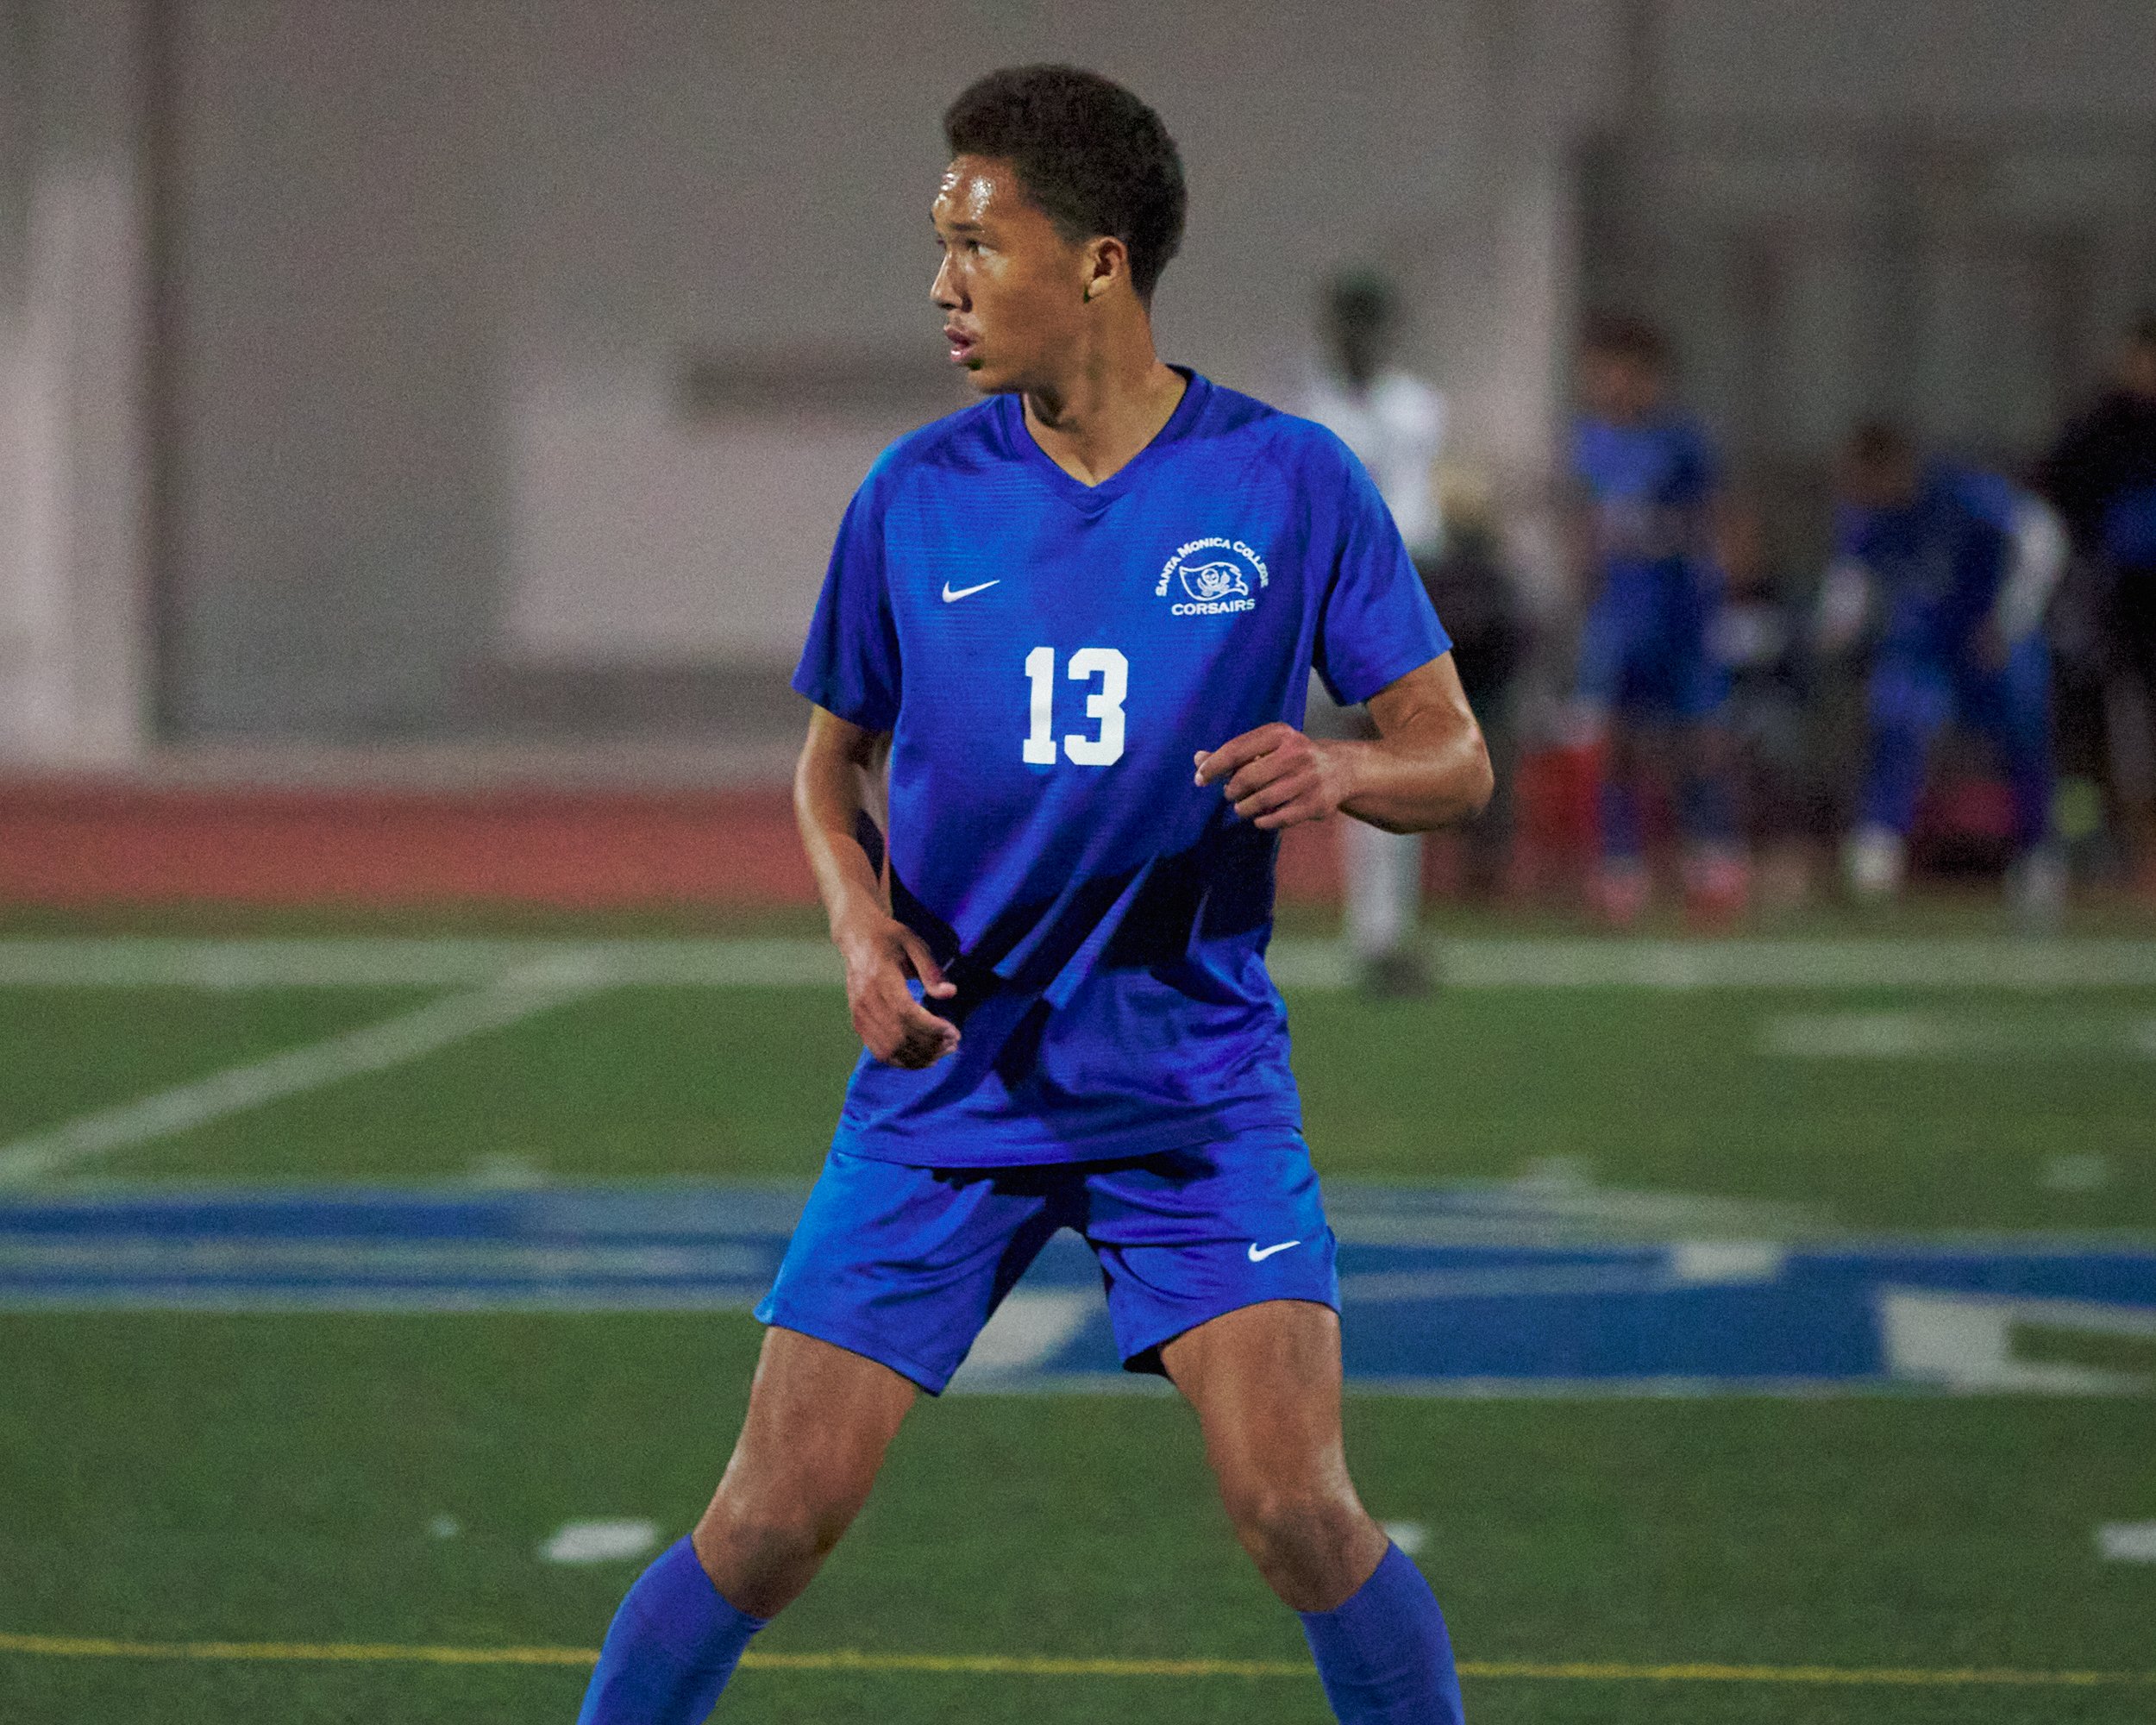  Santa Monica College Corsairs' Connor Gilmore during the men's soccer match against the Norco College Mustangs on Saturday, Nov. 19, 2022, at Corsair Field in Santa Monica, Calif. (Nicholas McCall | The Corsair) 